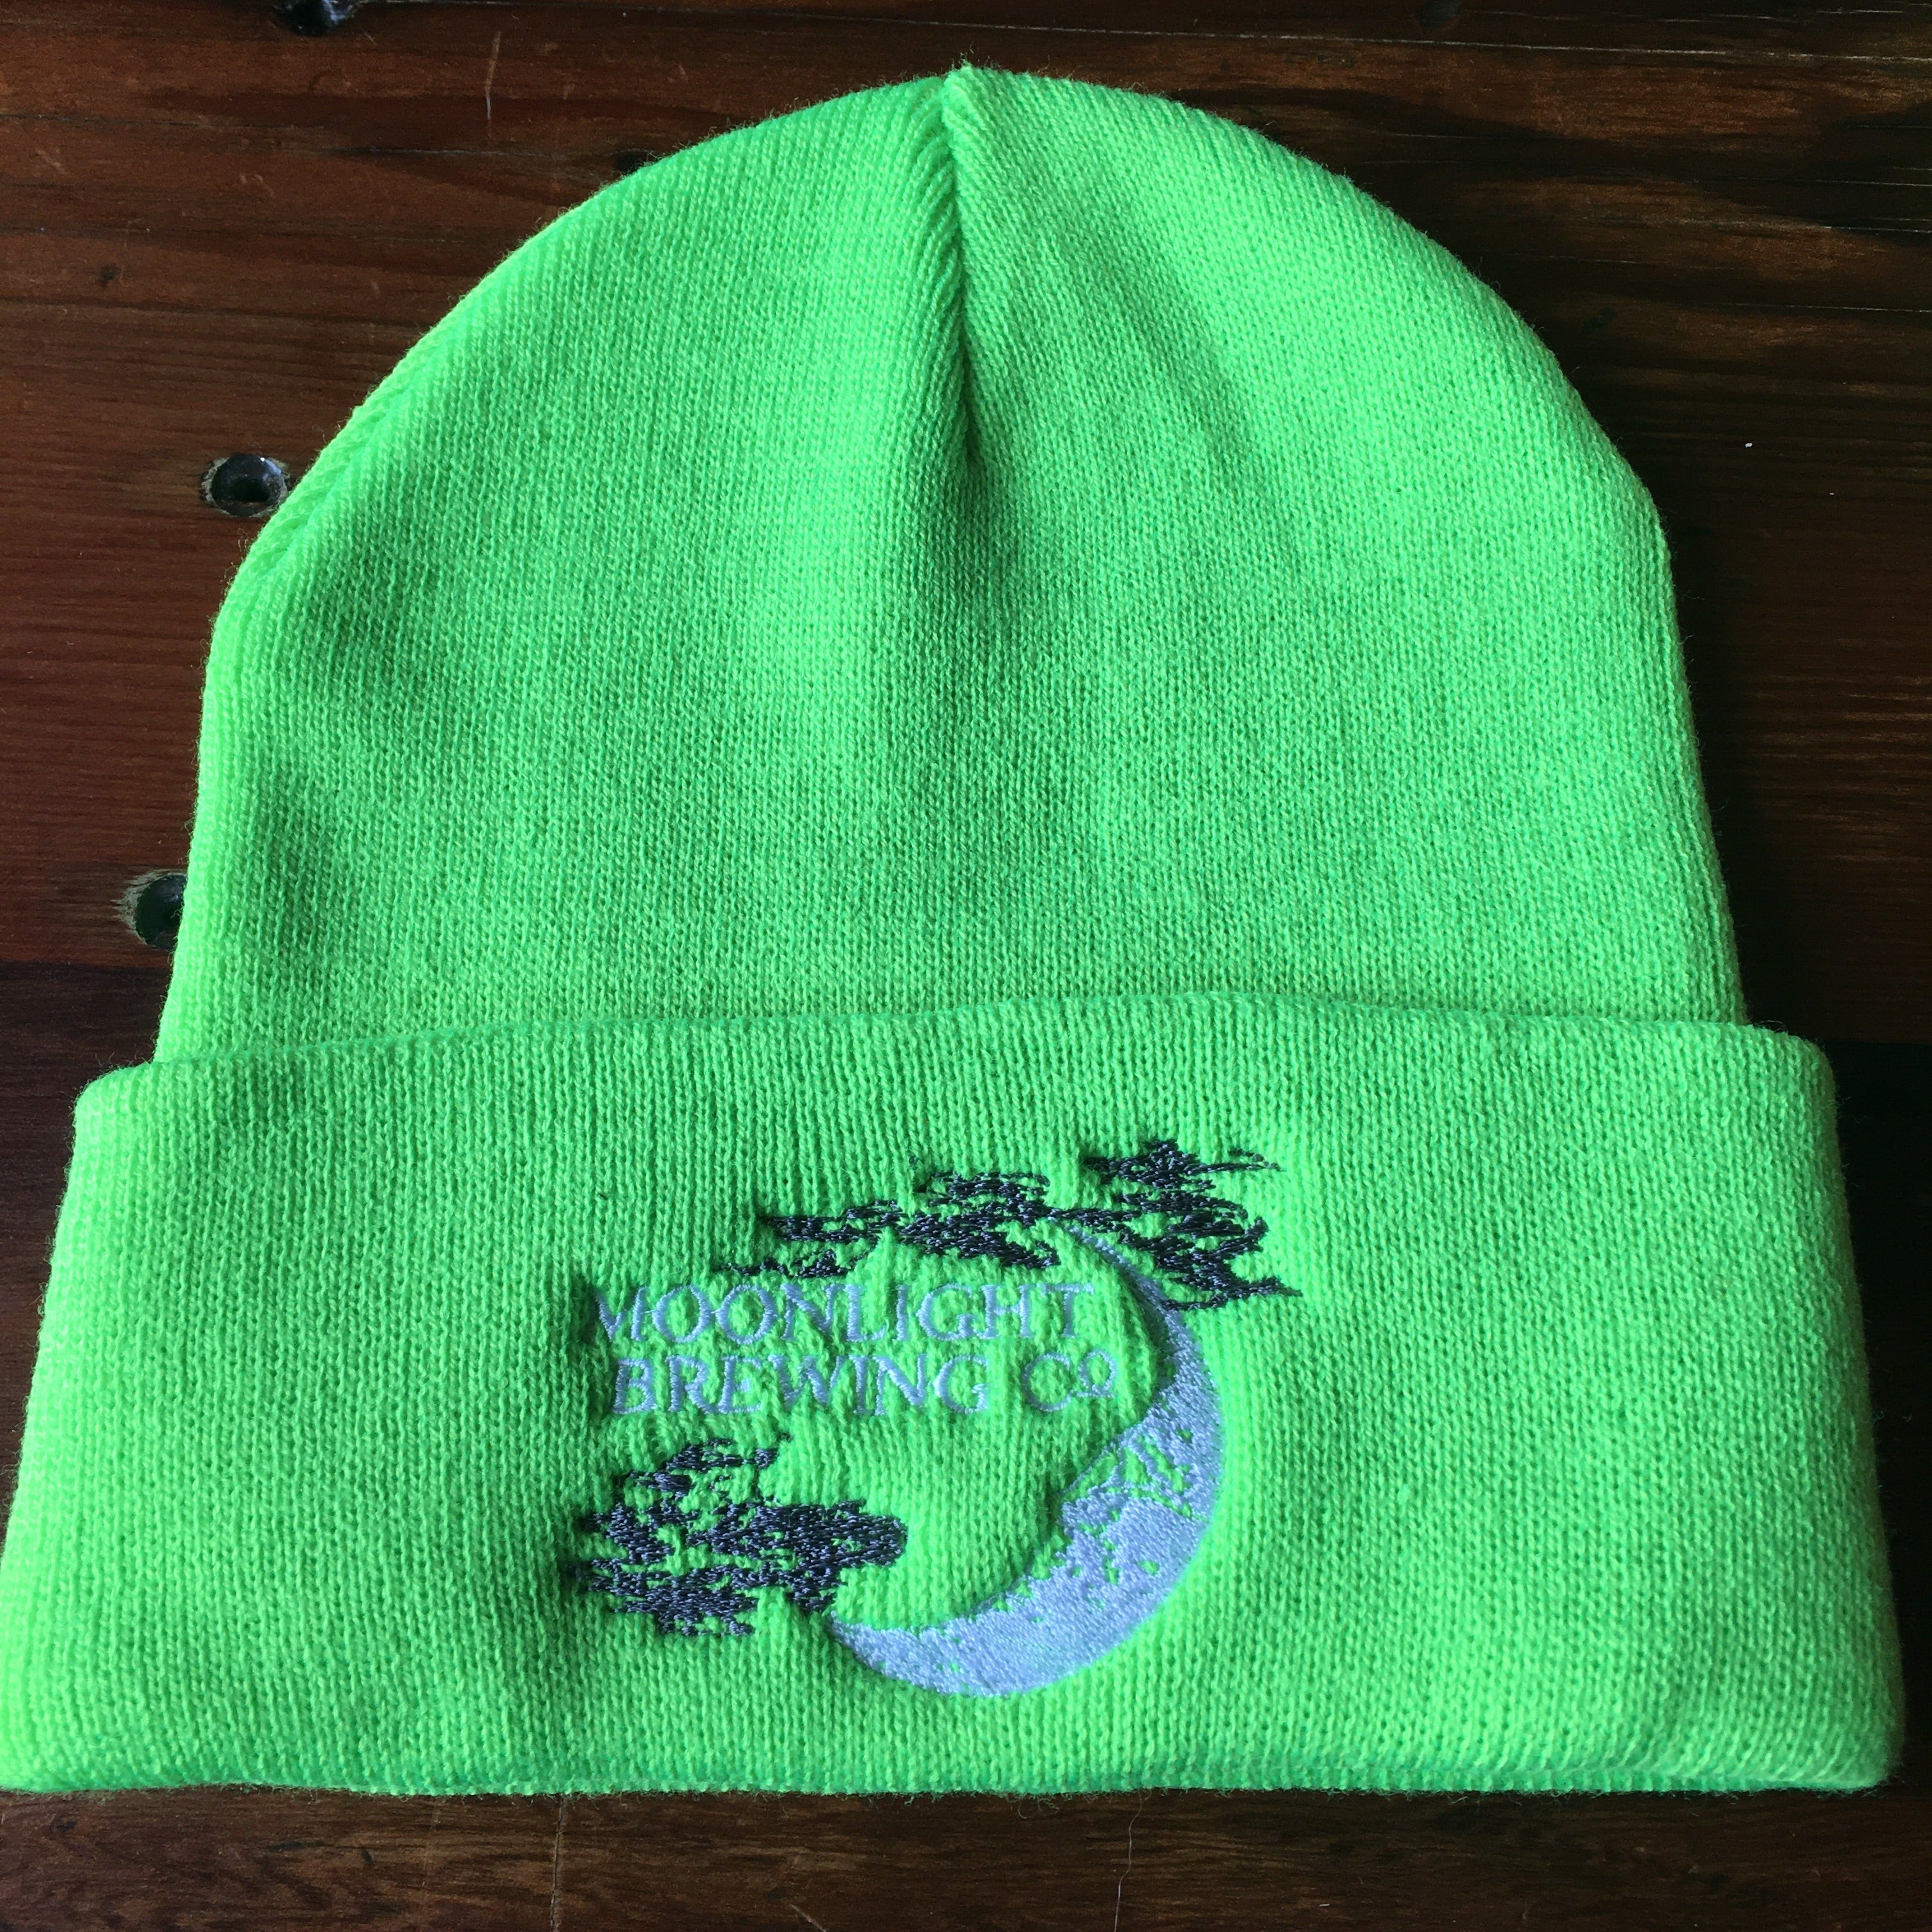 Green beanie with Moonlight Brewing logo on the front